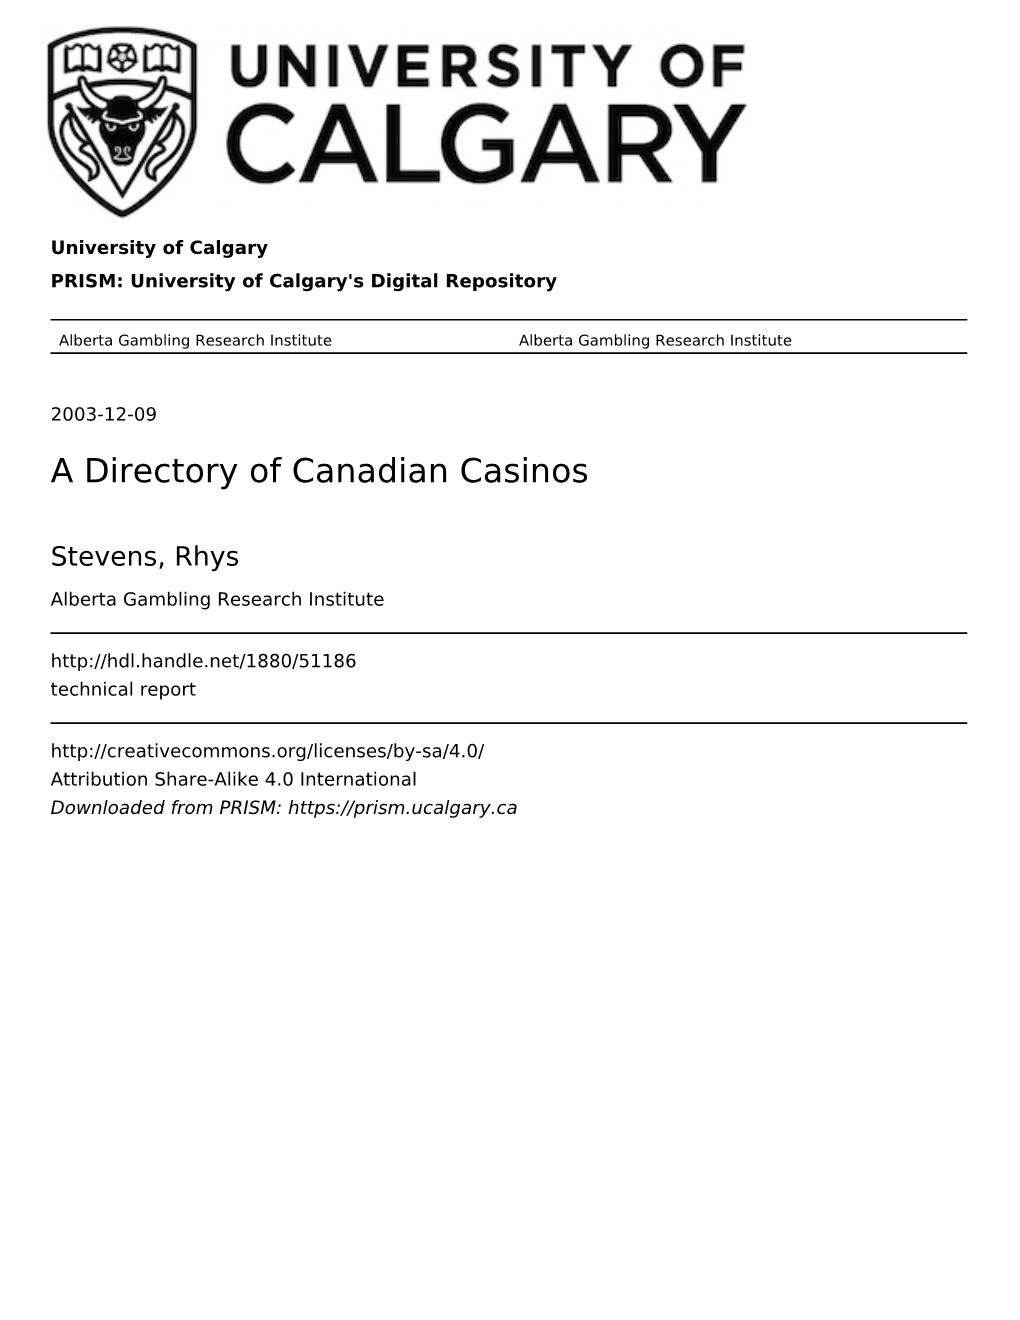 A Directory of Canadian Casinos